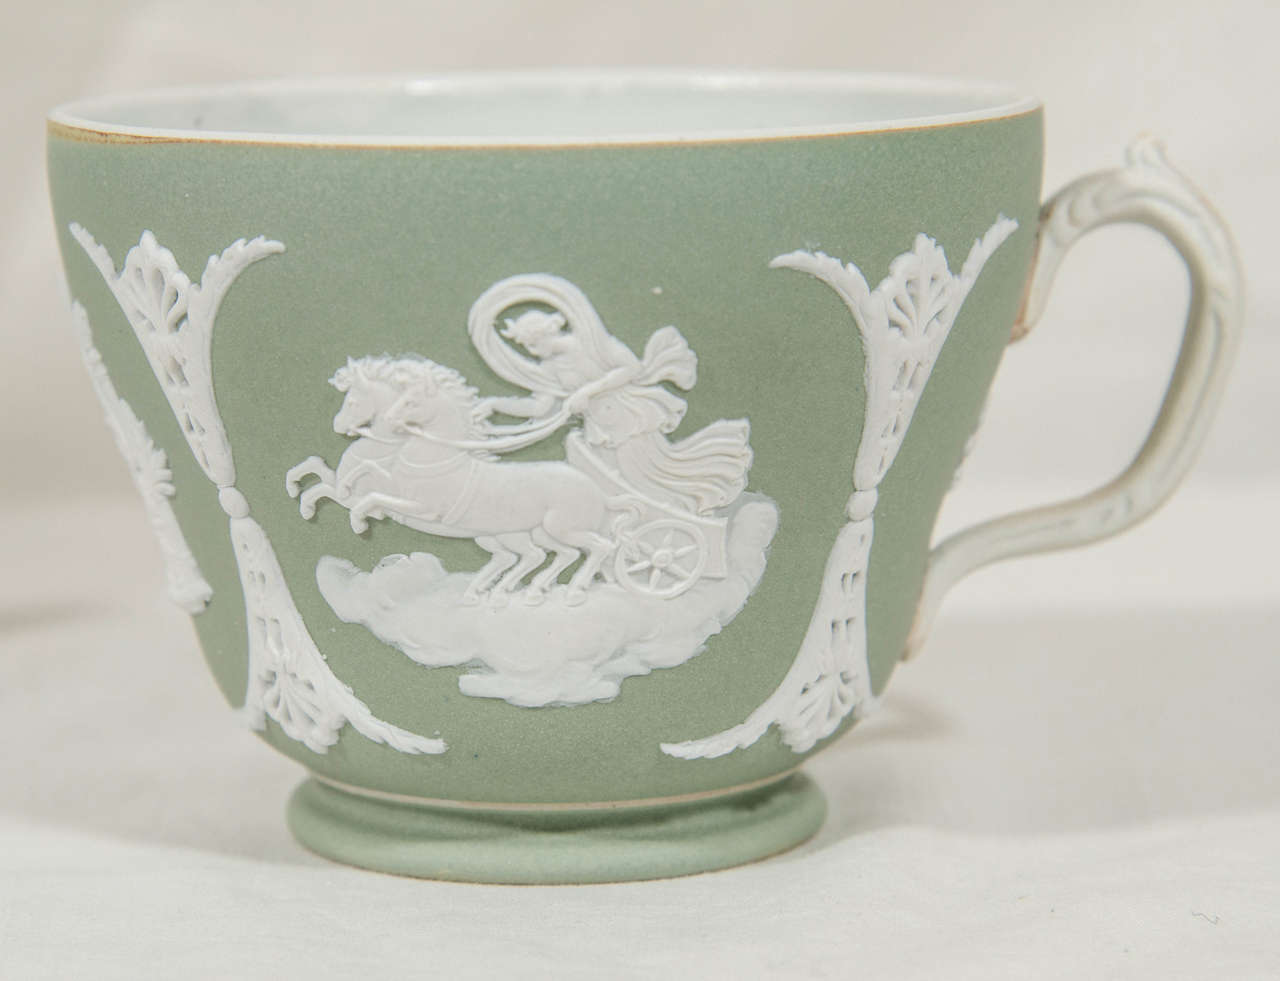 Neoclassical Antique Wedgwood Jasperware Tea Cup and Saucer